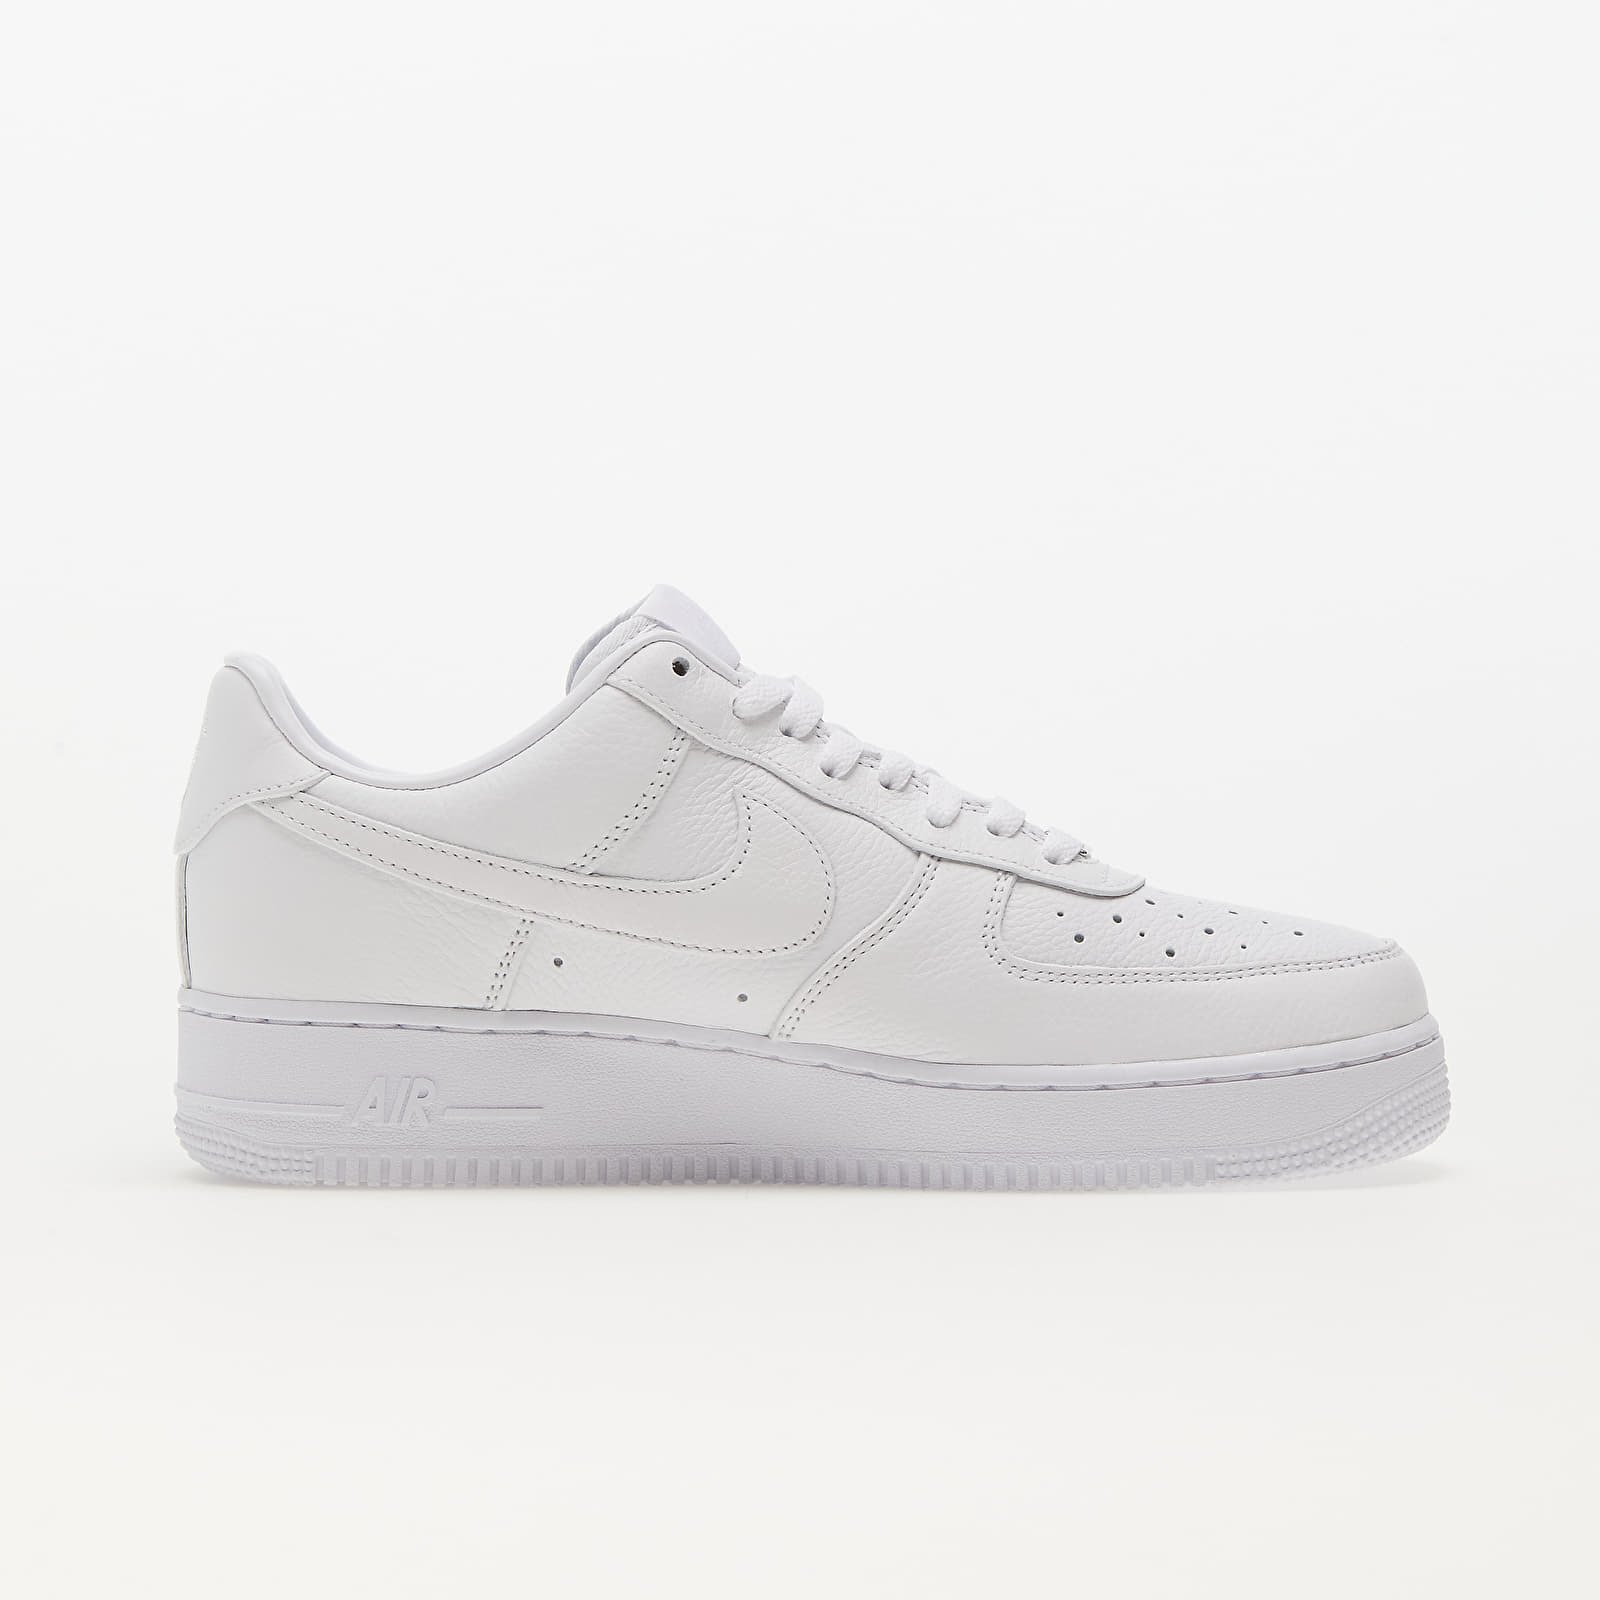 NOCTA x Air Force 1 Low “Certified Lover Boy”